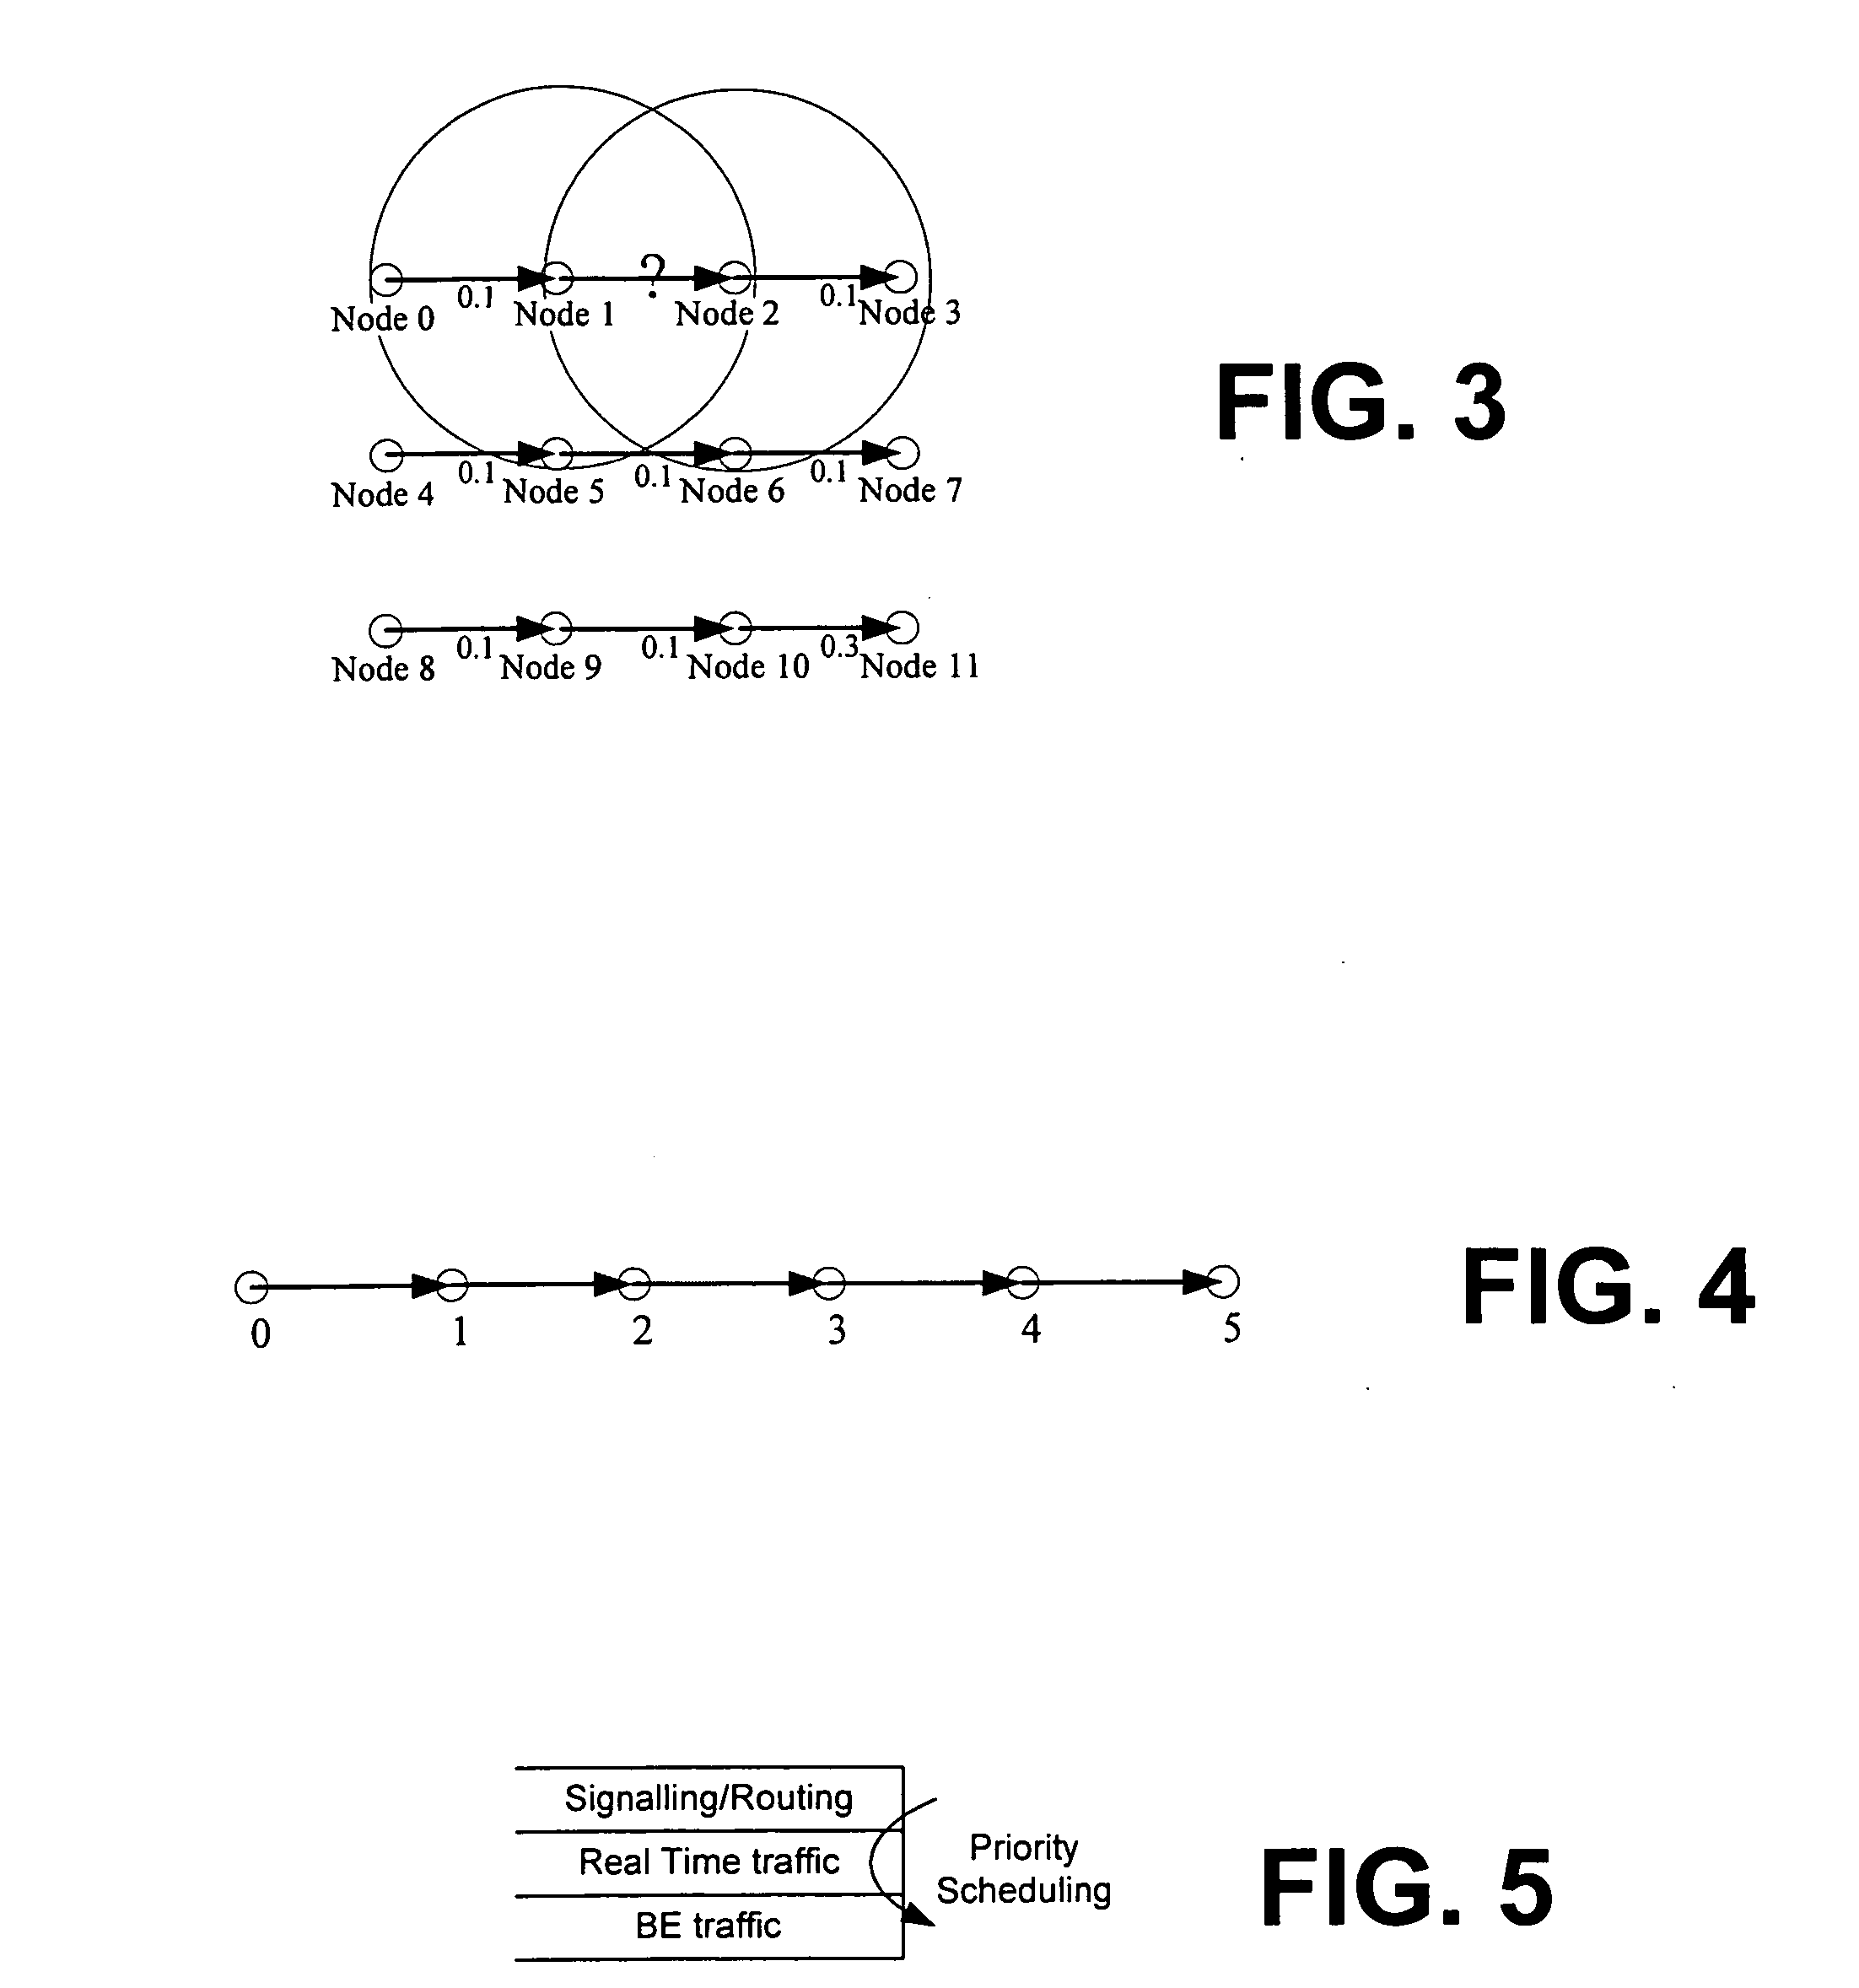 Systems and methods for coordinating wireless traffic for heterogeneous wireless devices